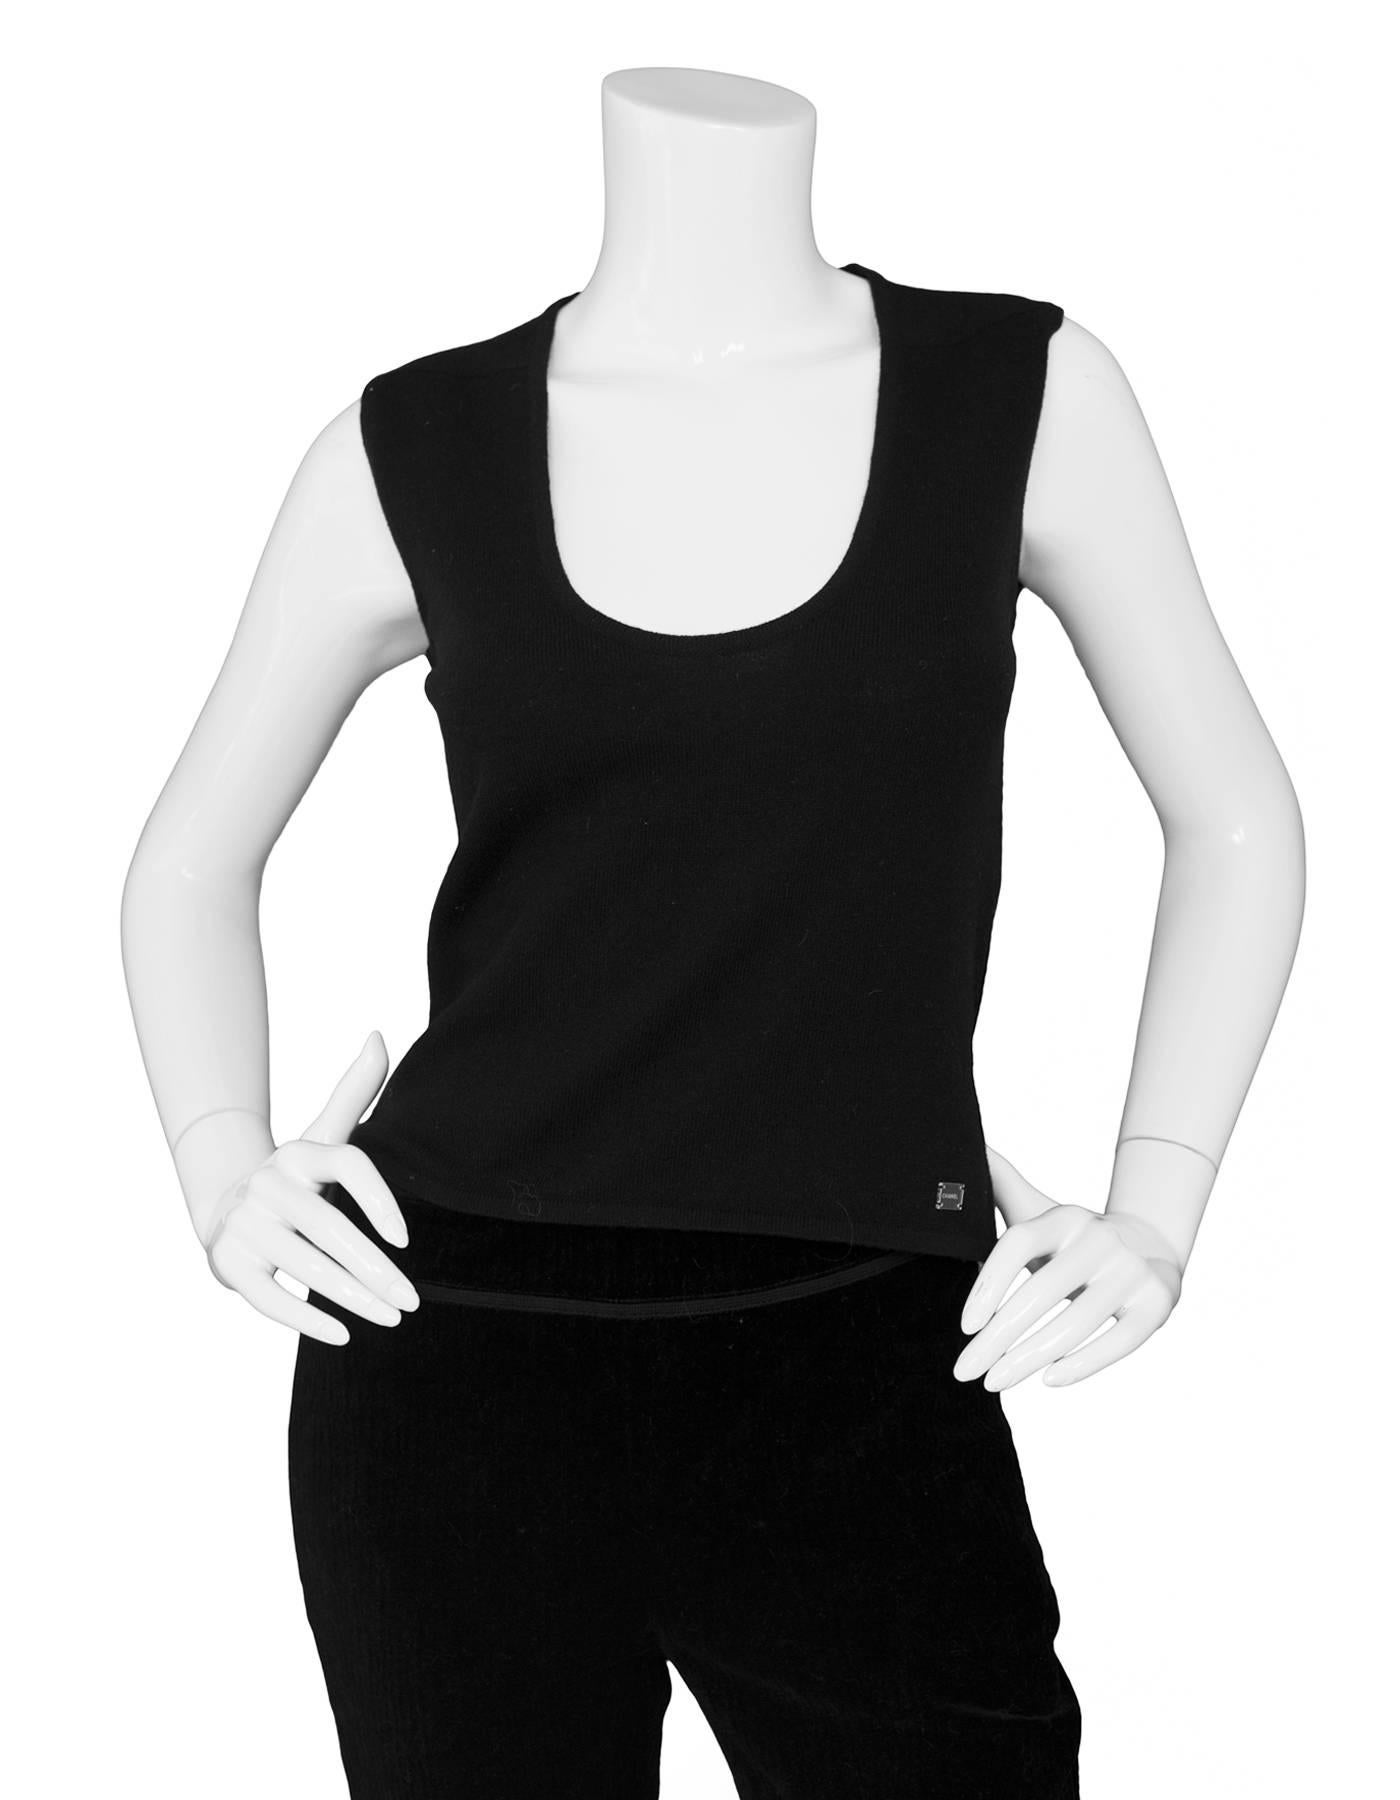 Chanel Black Cashmere Sleeveless Top Sz FR38

Made In: United Kingdom
Year of Production: 2005
Color: Black
Composition: 100% cashmere
Closure/Opening: Pull over 
Overall Condition: Excellent pre-owned condition, light pilling
Marked Size: FR38/ US